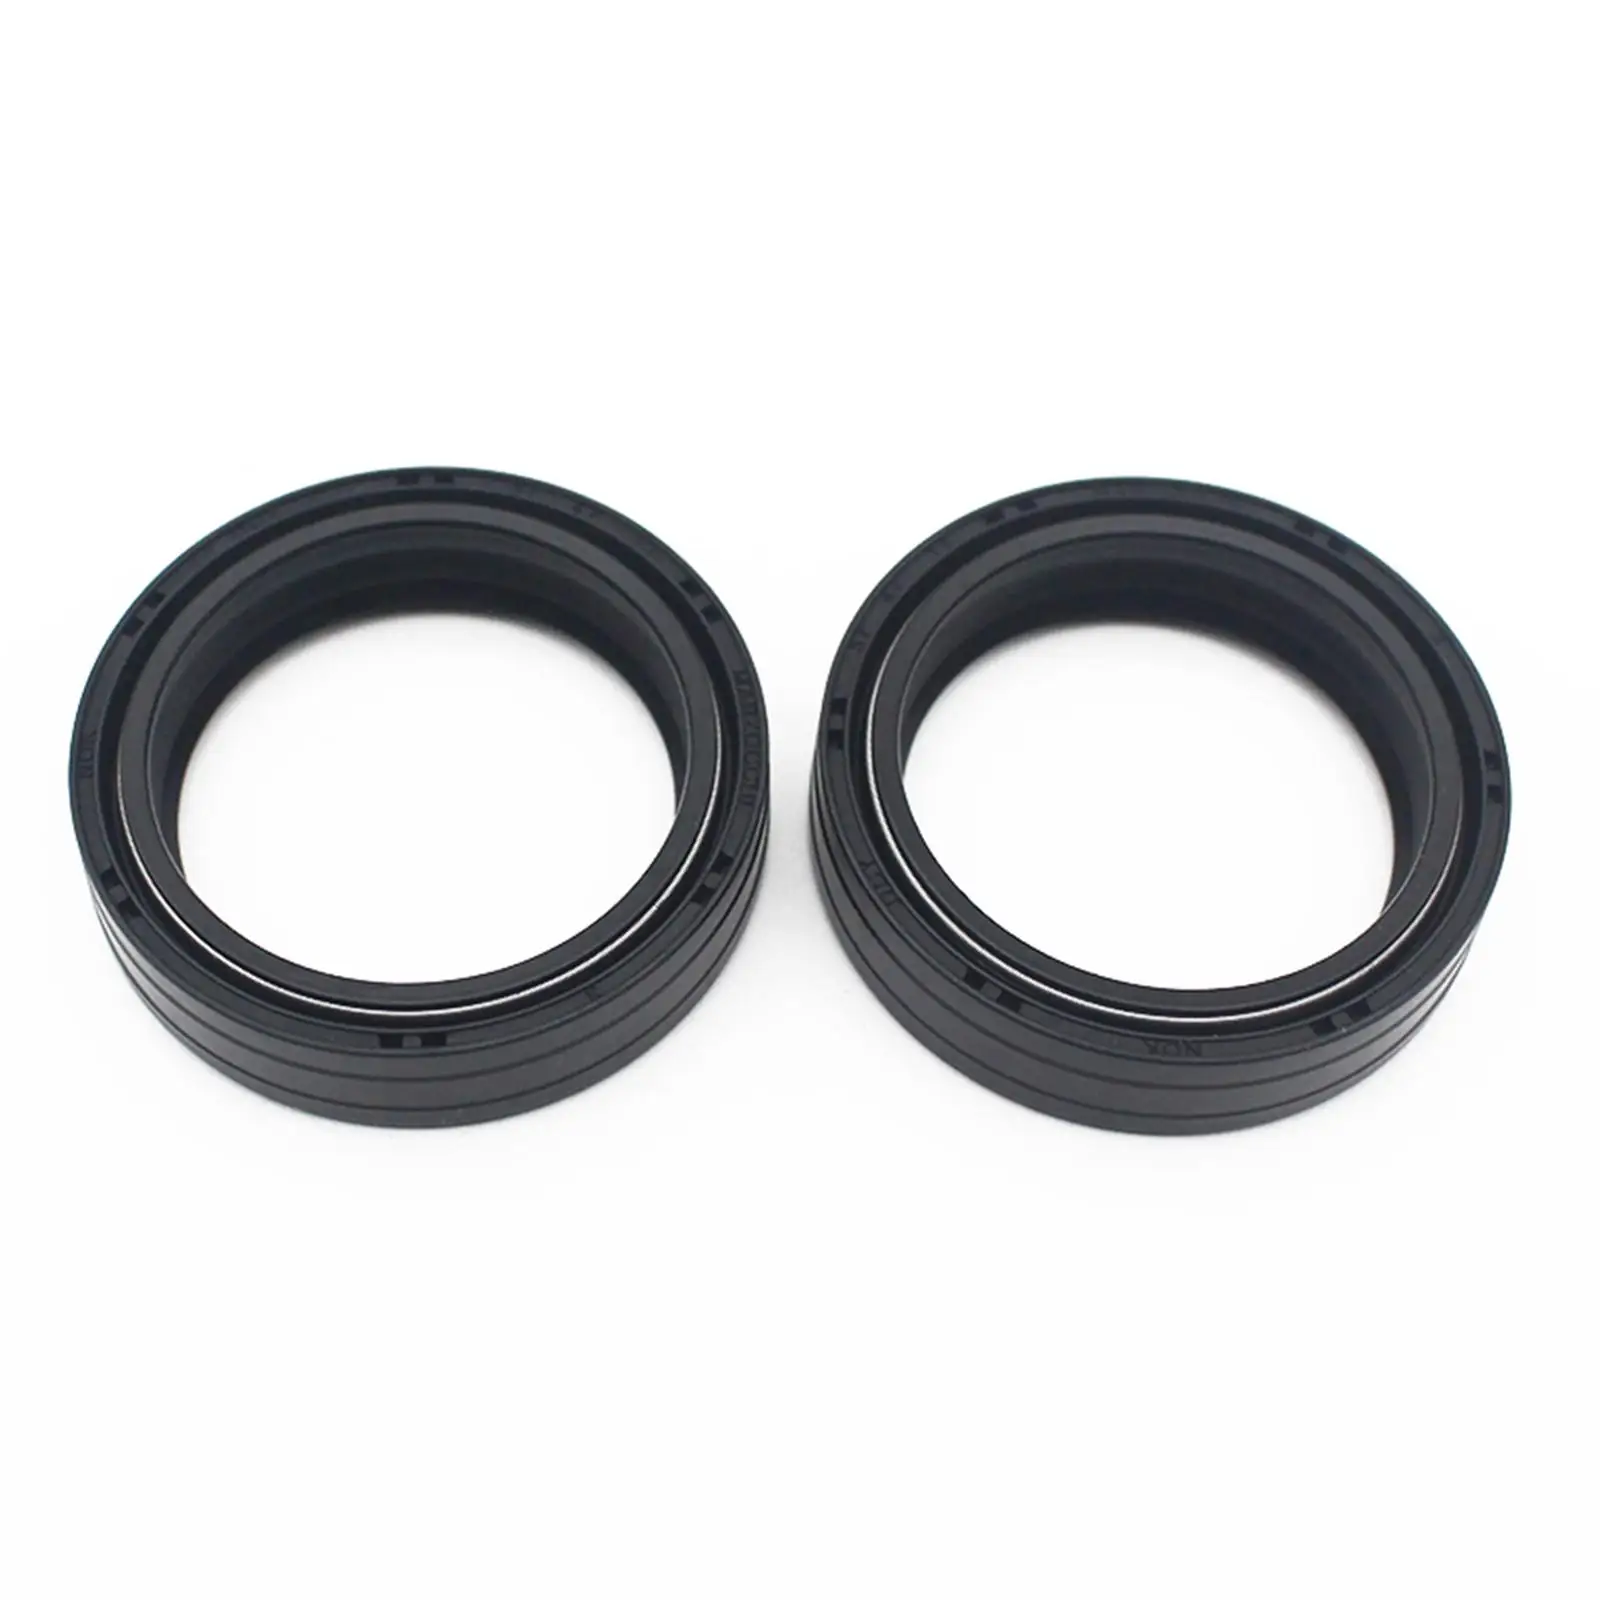 2-4pack Fork and Dust Seal Motorcycle Accessories for BMW R1200GS Adventure